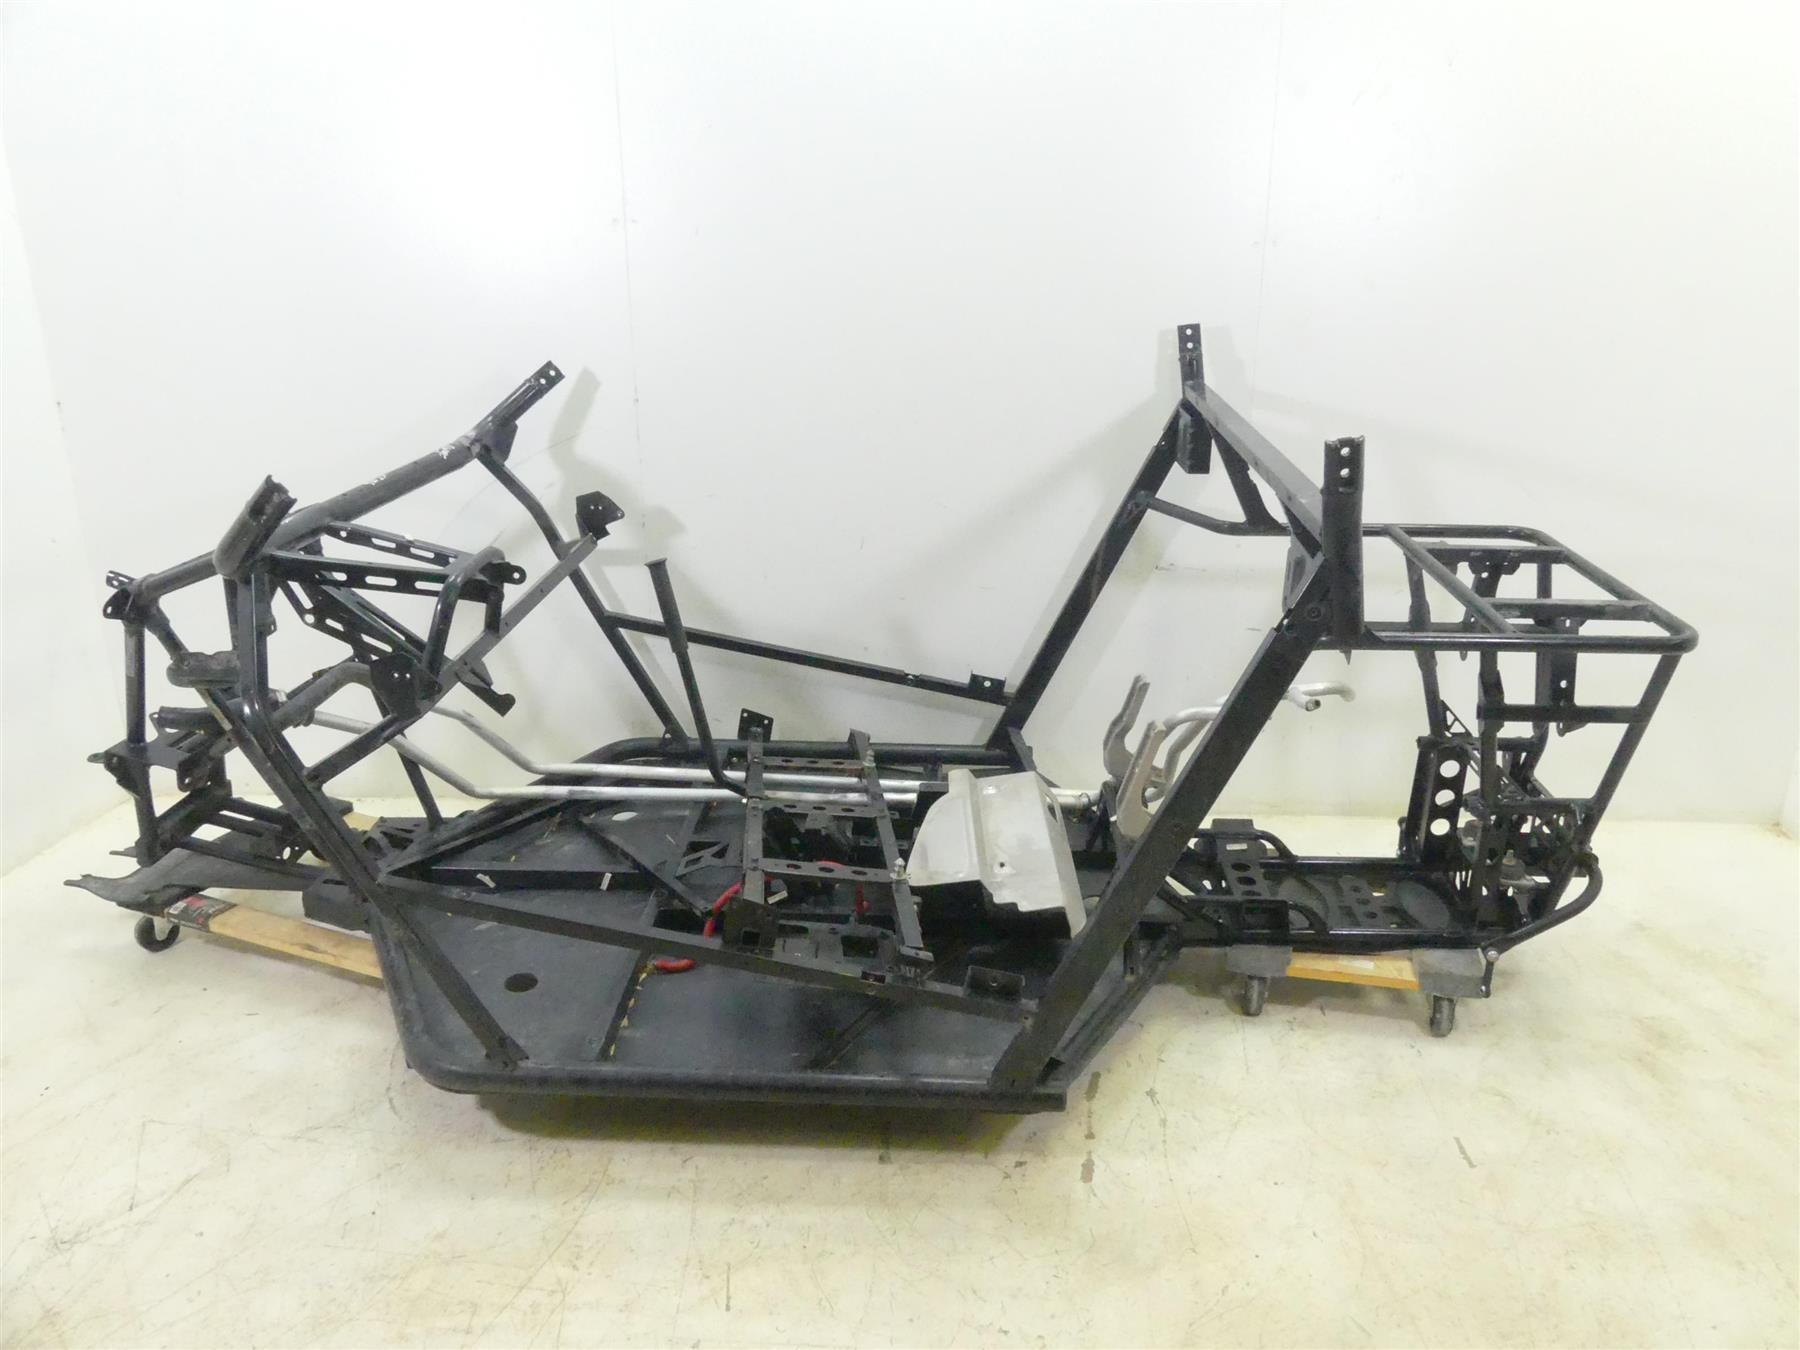 2015 Arctic Wild Cat 700 Sport LTD Frame Chassis With Texas